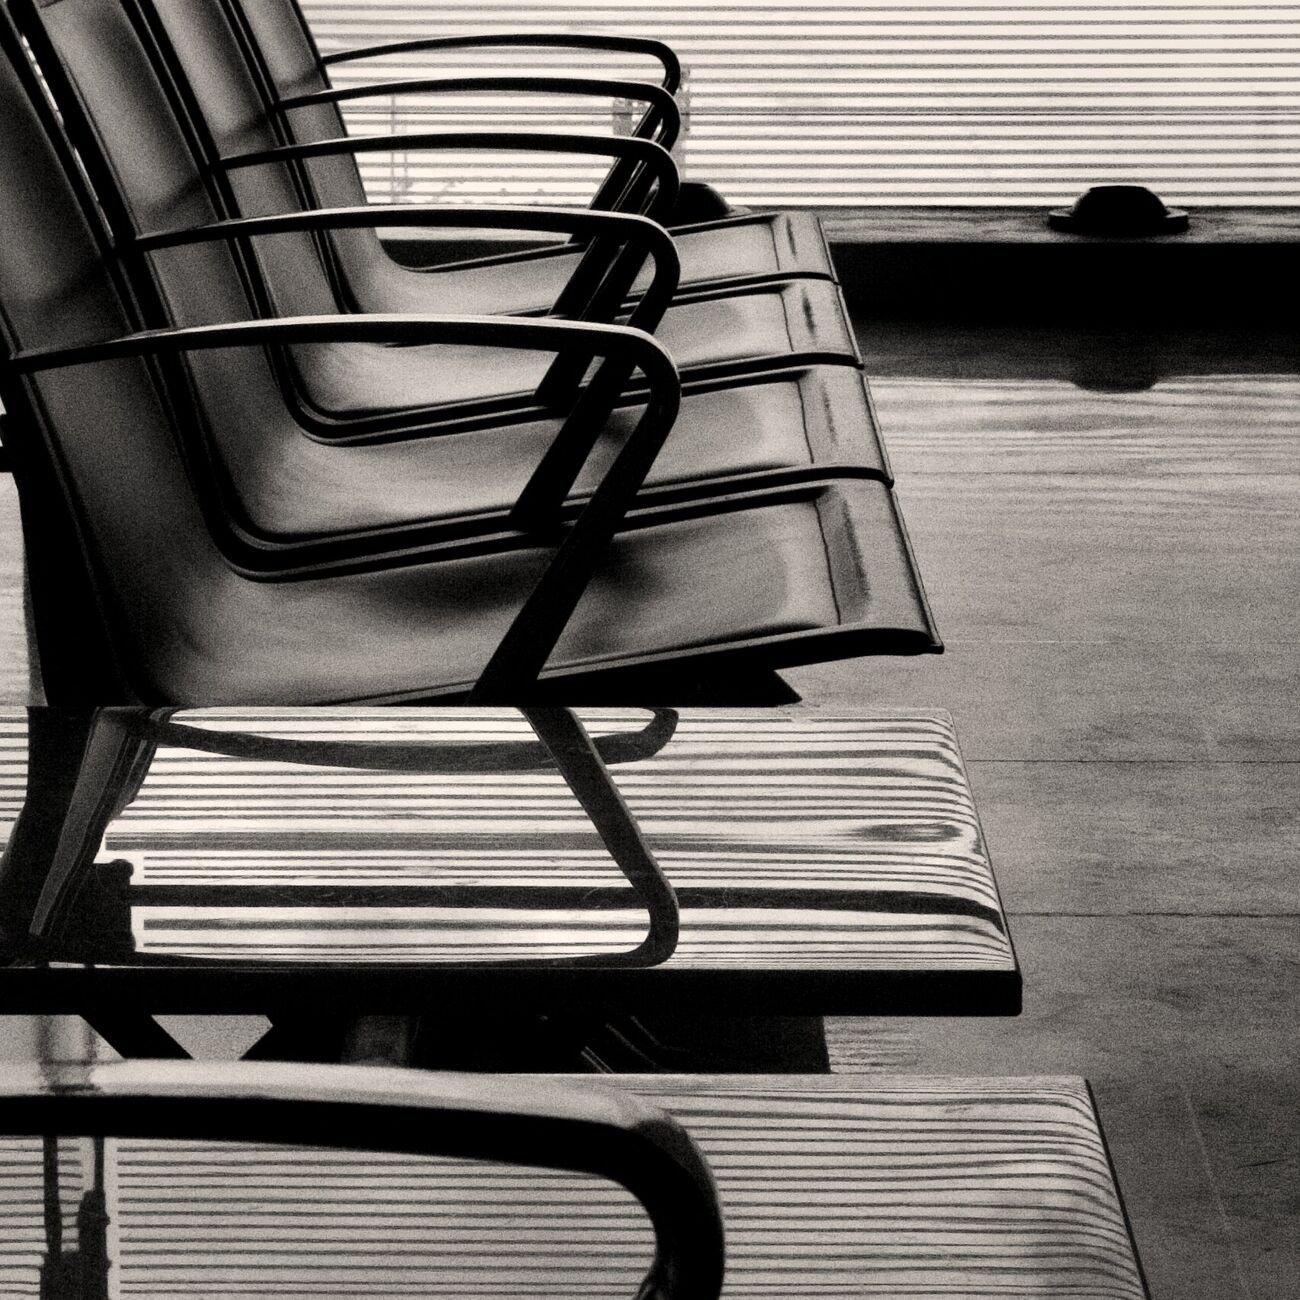 Waiting For The Next Flight, Bordeaux International Airport, France. Avril 2003. Ref-734 - Denis Olivier Photographie